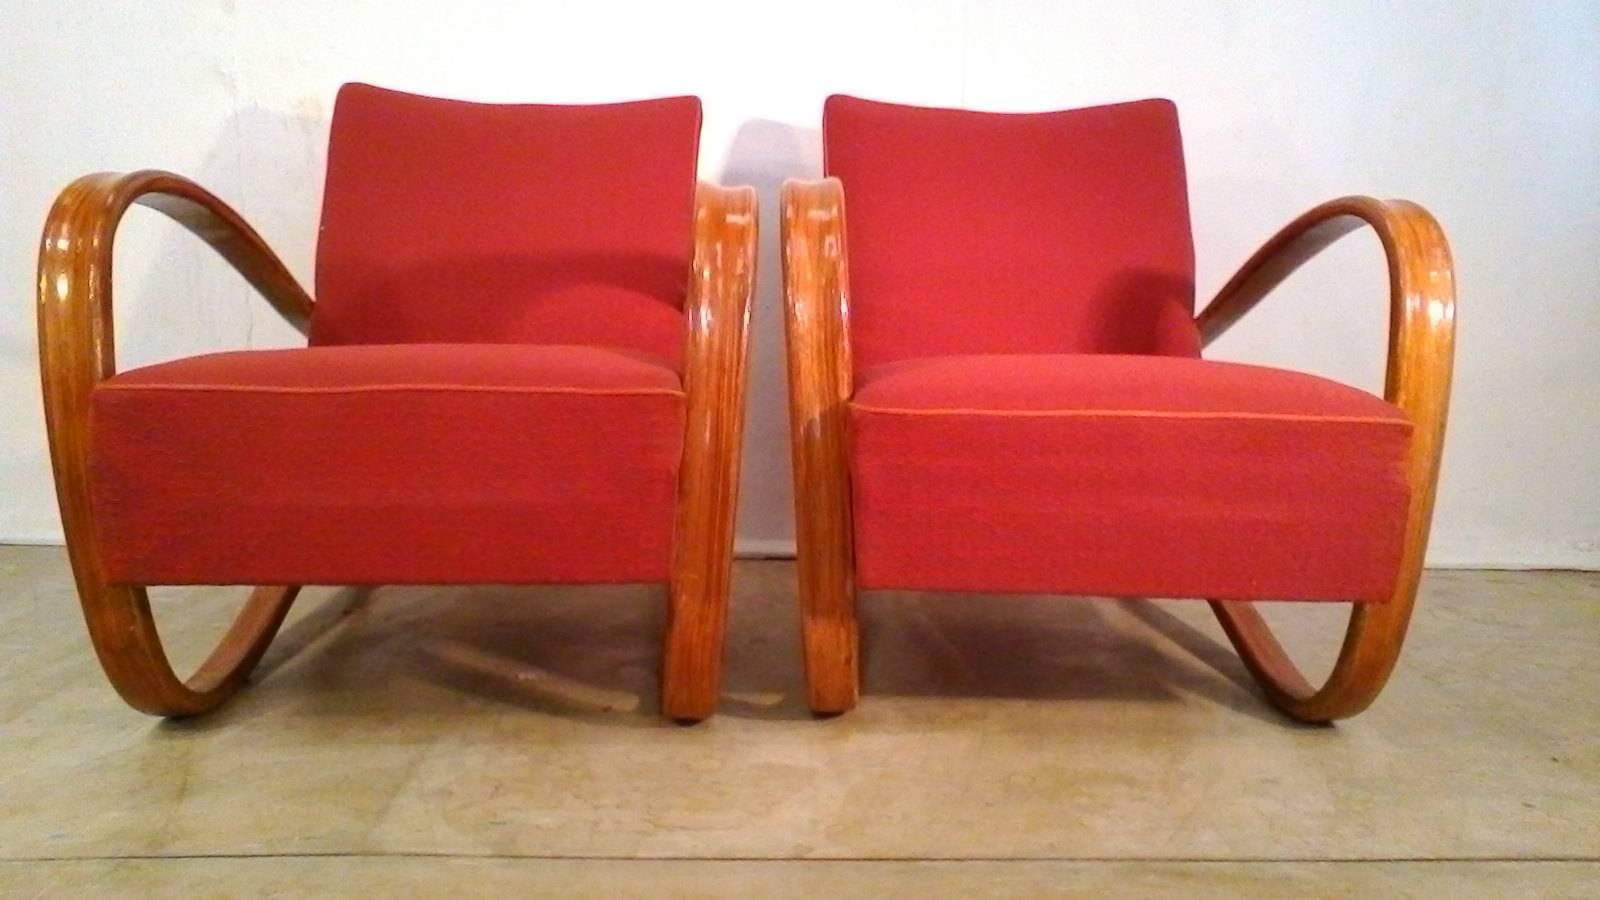 Iconic H-269 chairs by Jjindrich Halabala in very good, original condition. They show only minor wear on the wooden parts and original upholstery. Not restored.